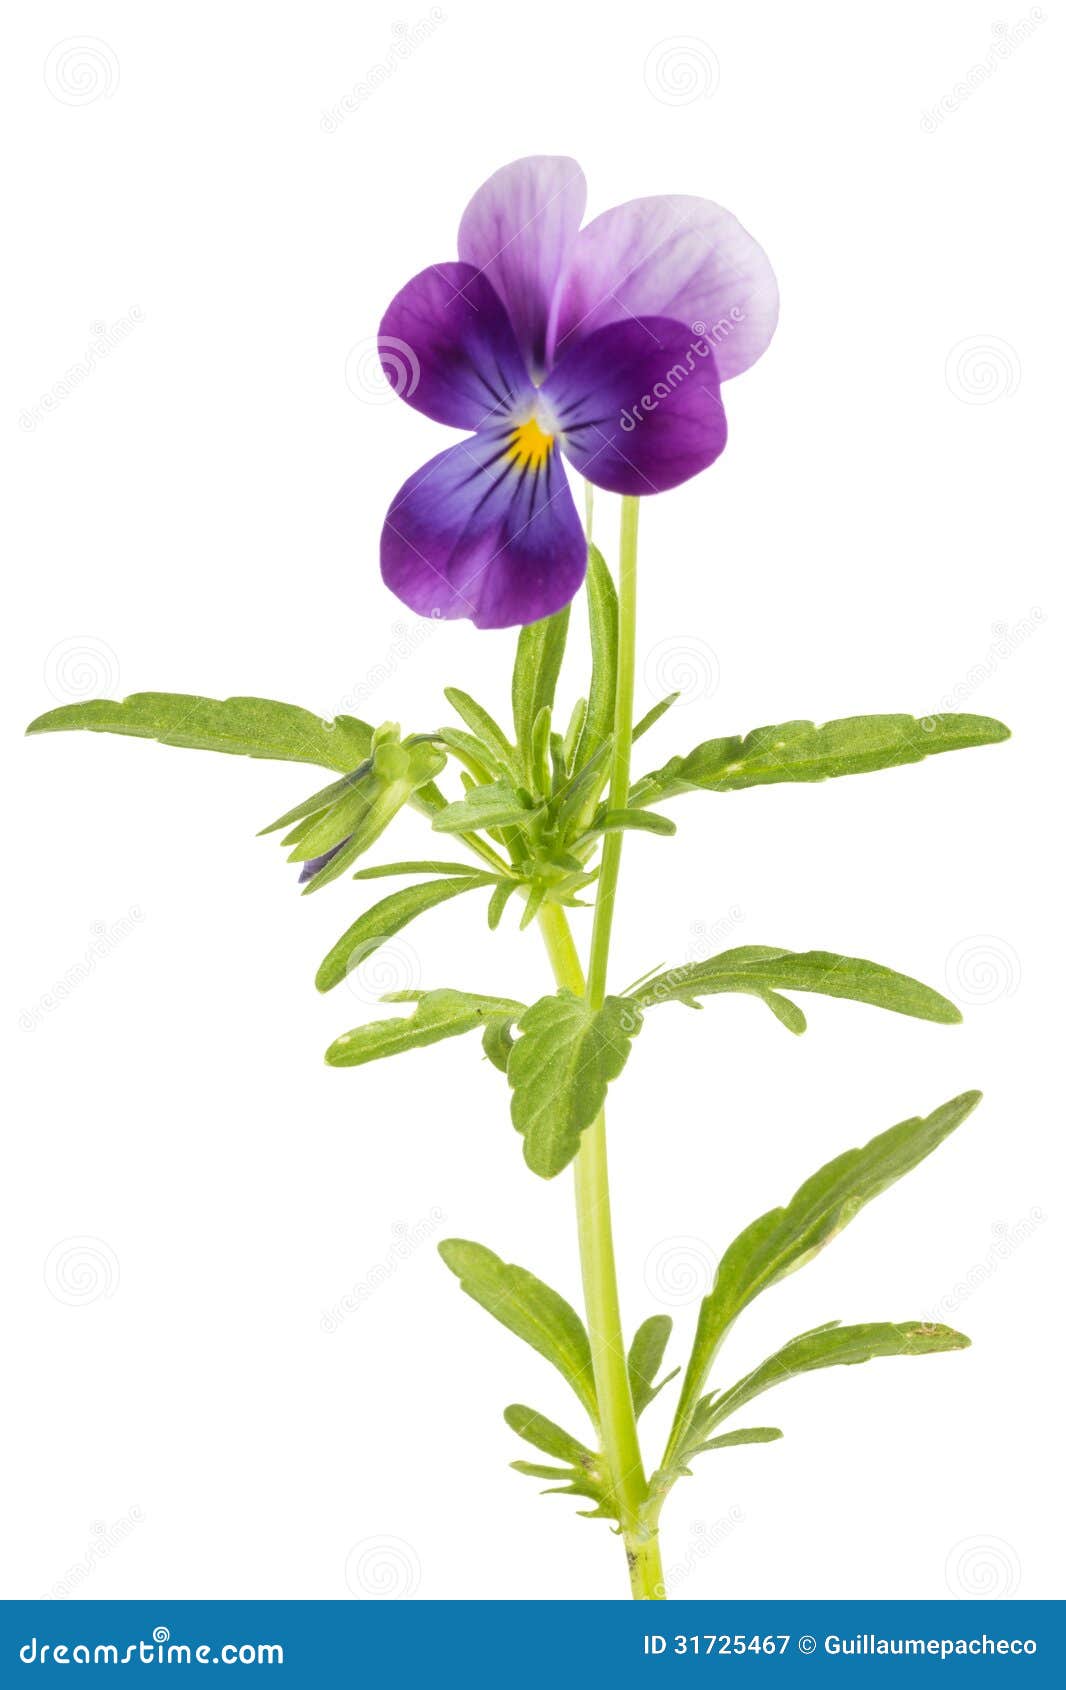 viola/pansy tricolor  on white background